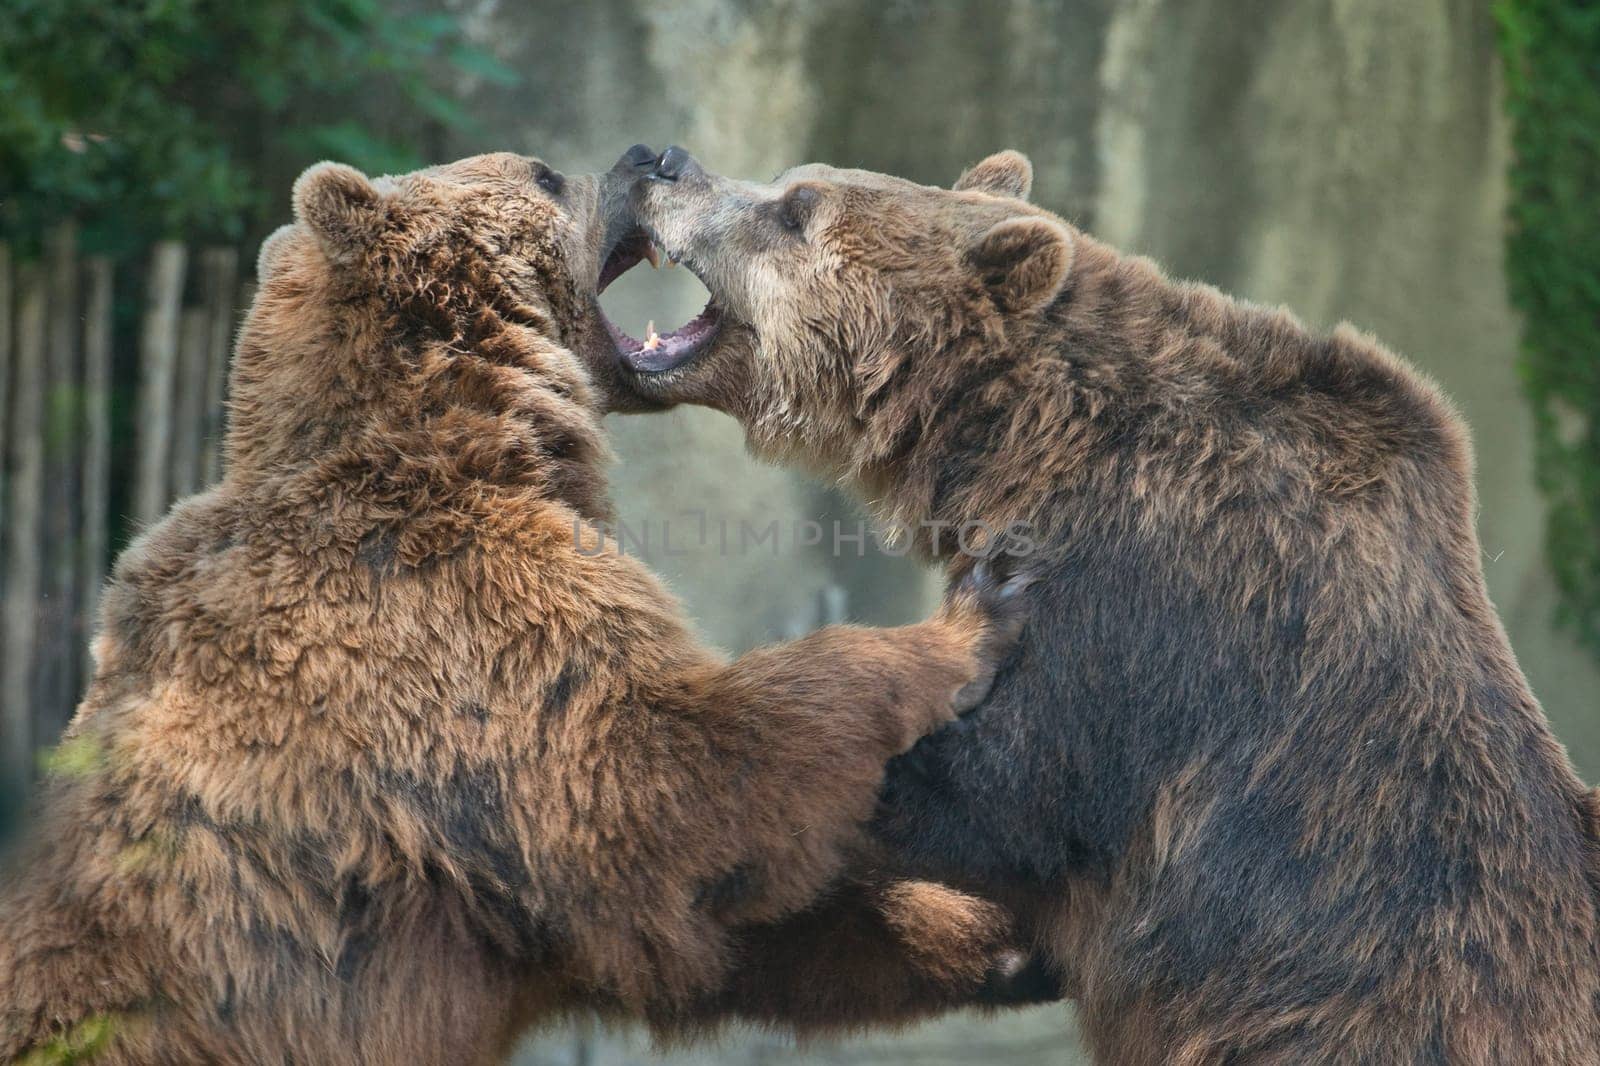 Two Black grizzly bears while fighting